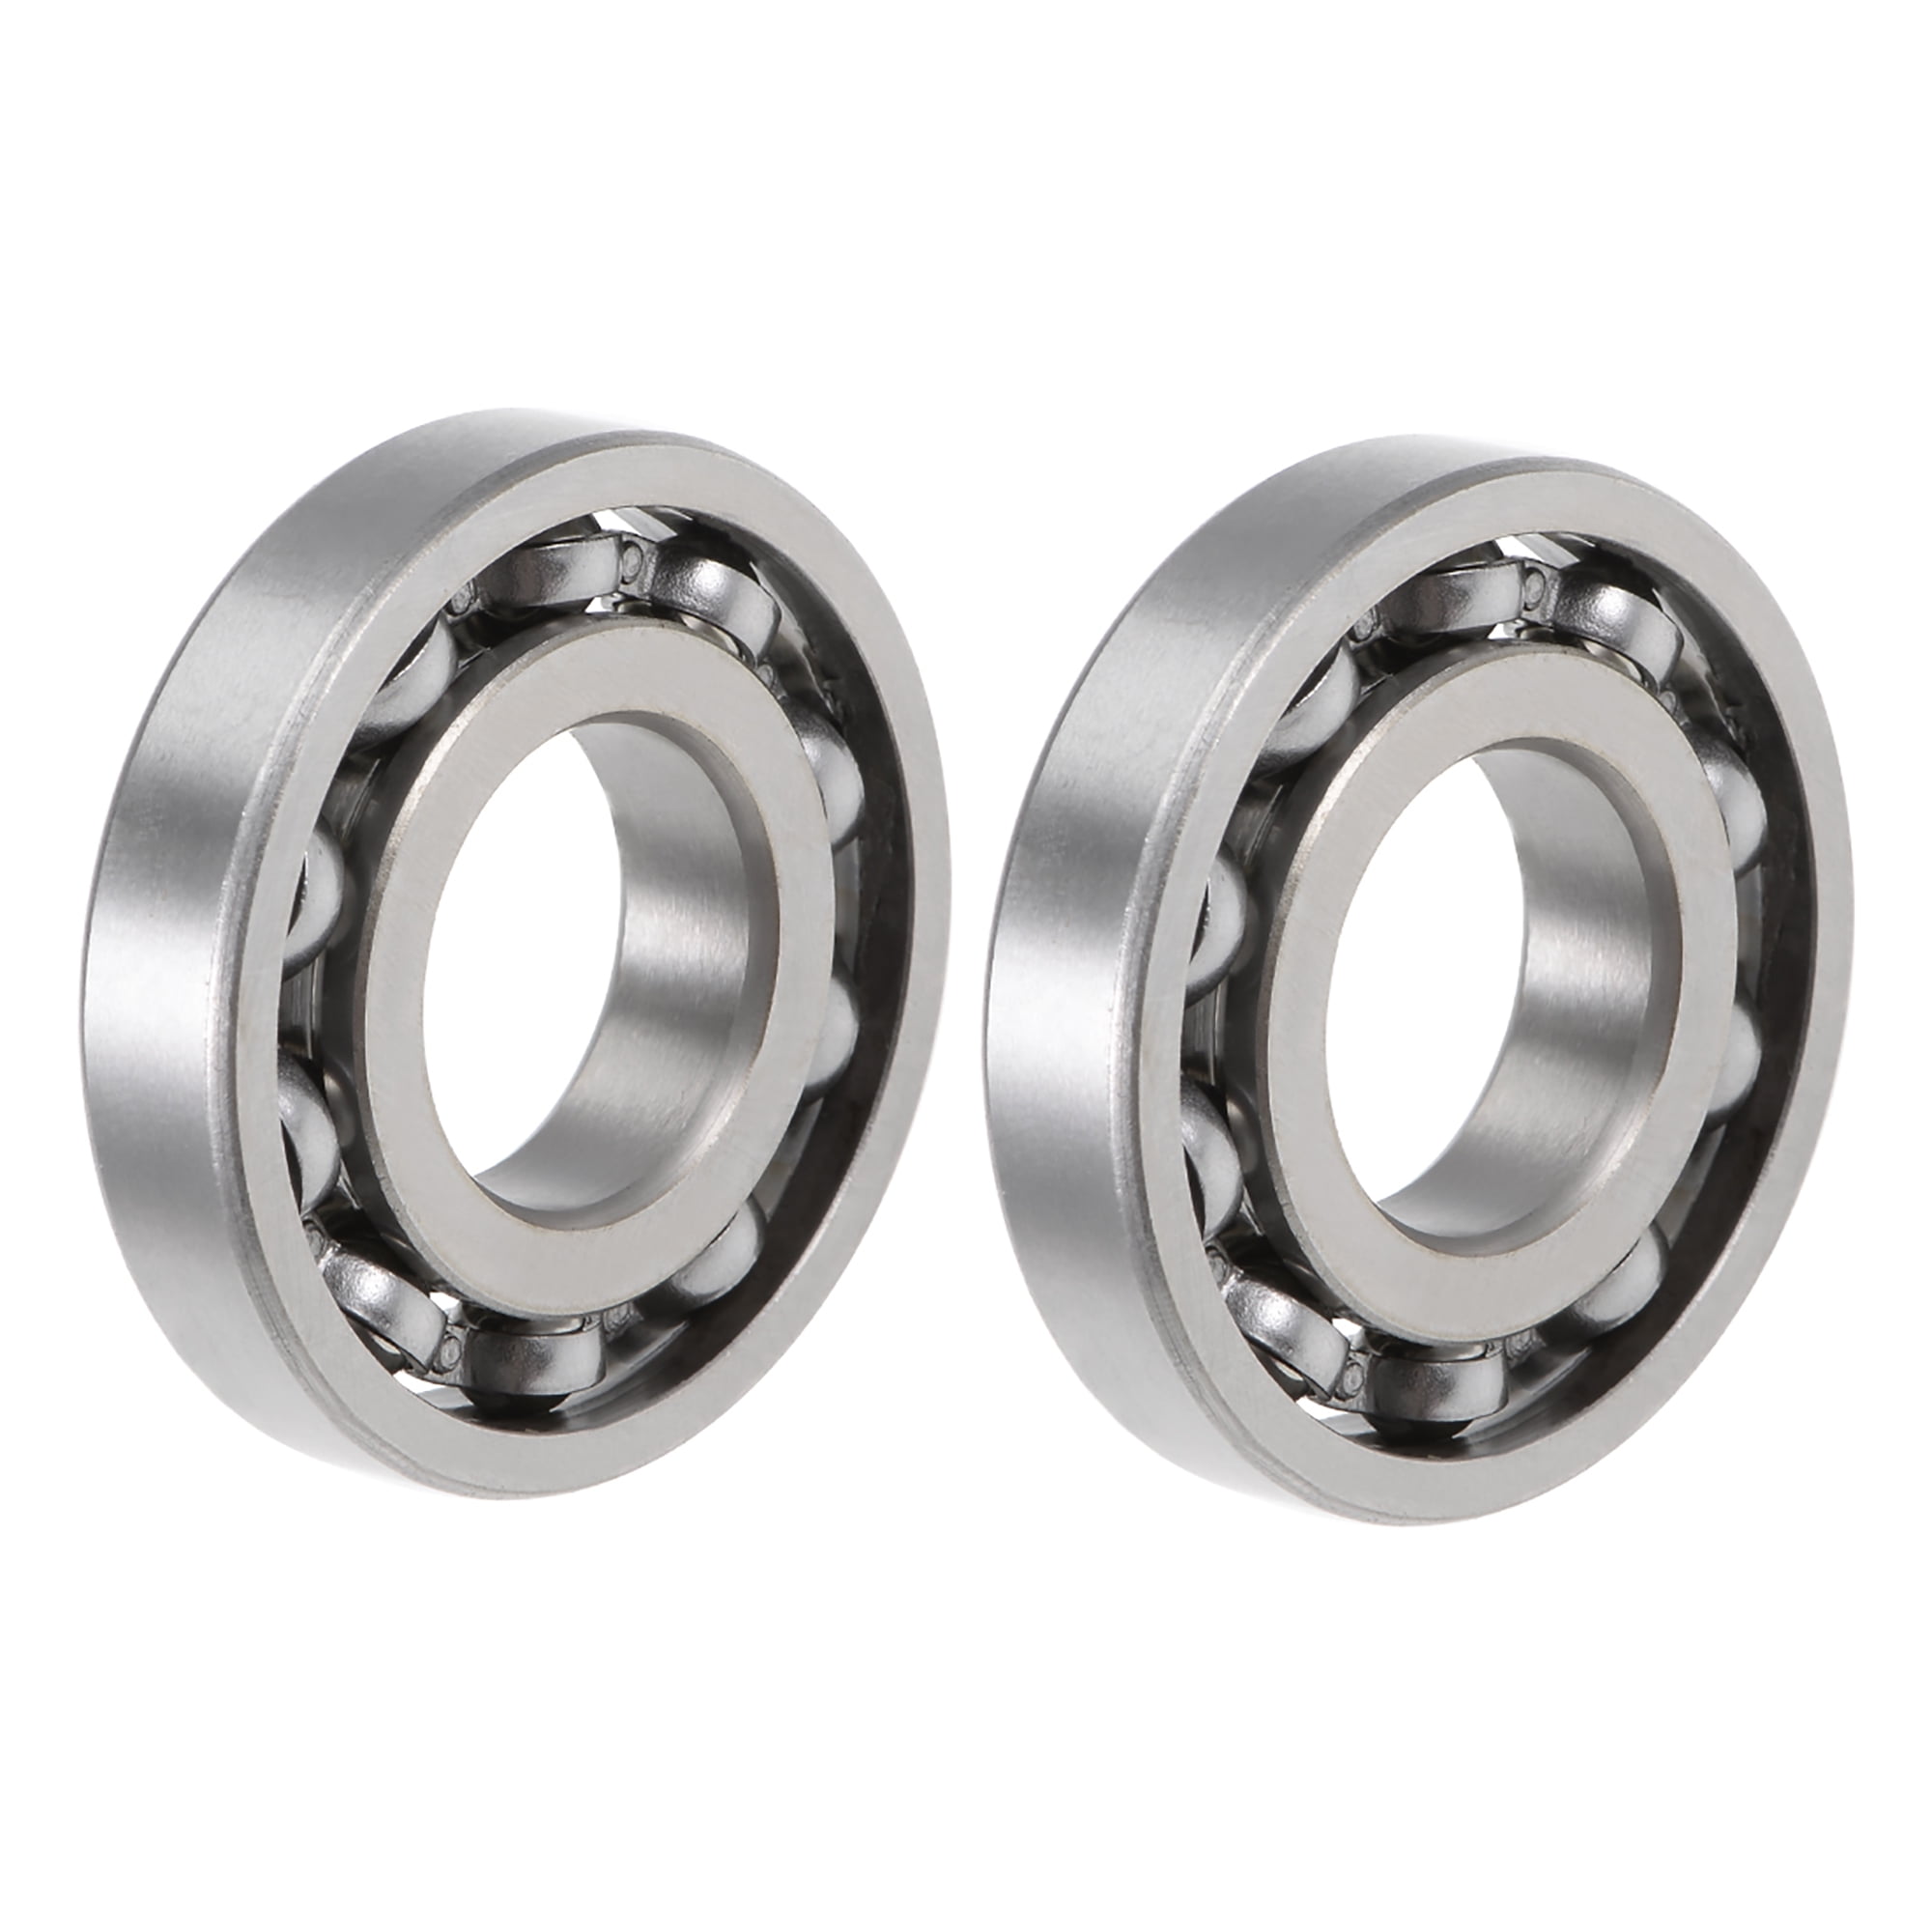 Flanged and Shielded One Pair ABEC 7-3/32" Axle Ball Bearings 